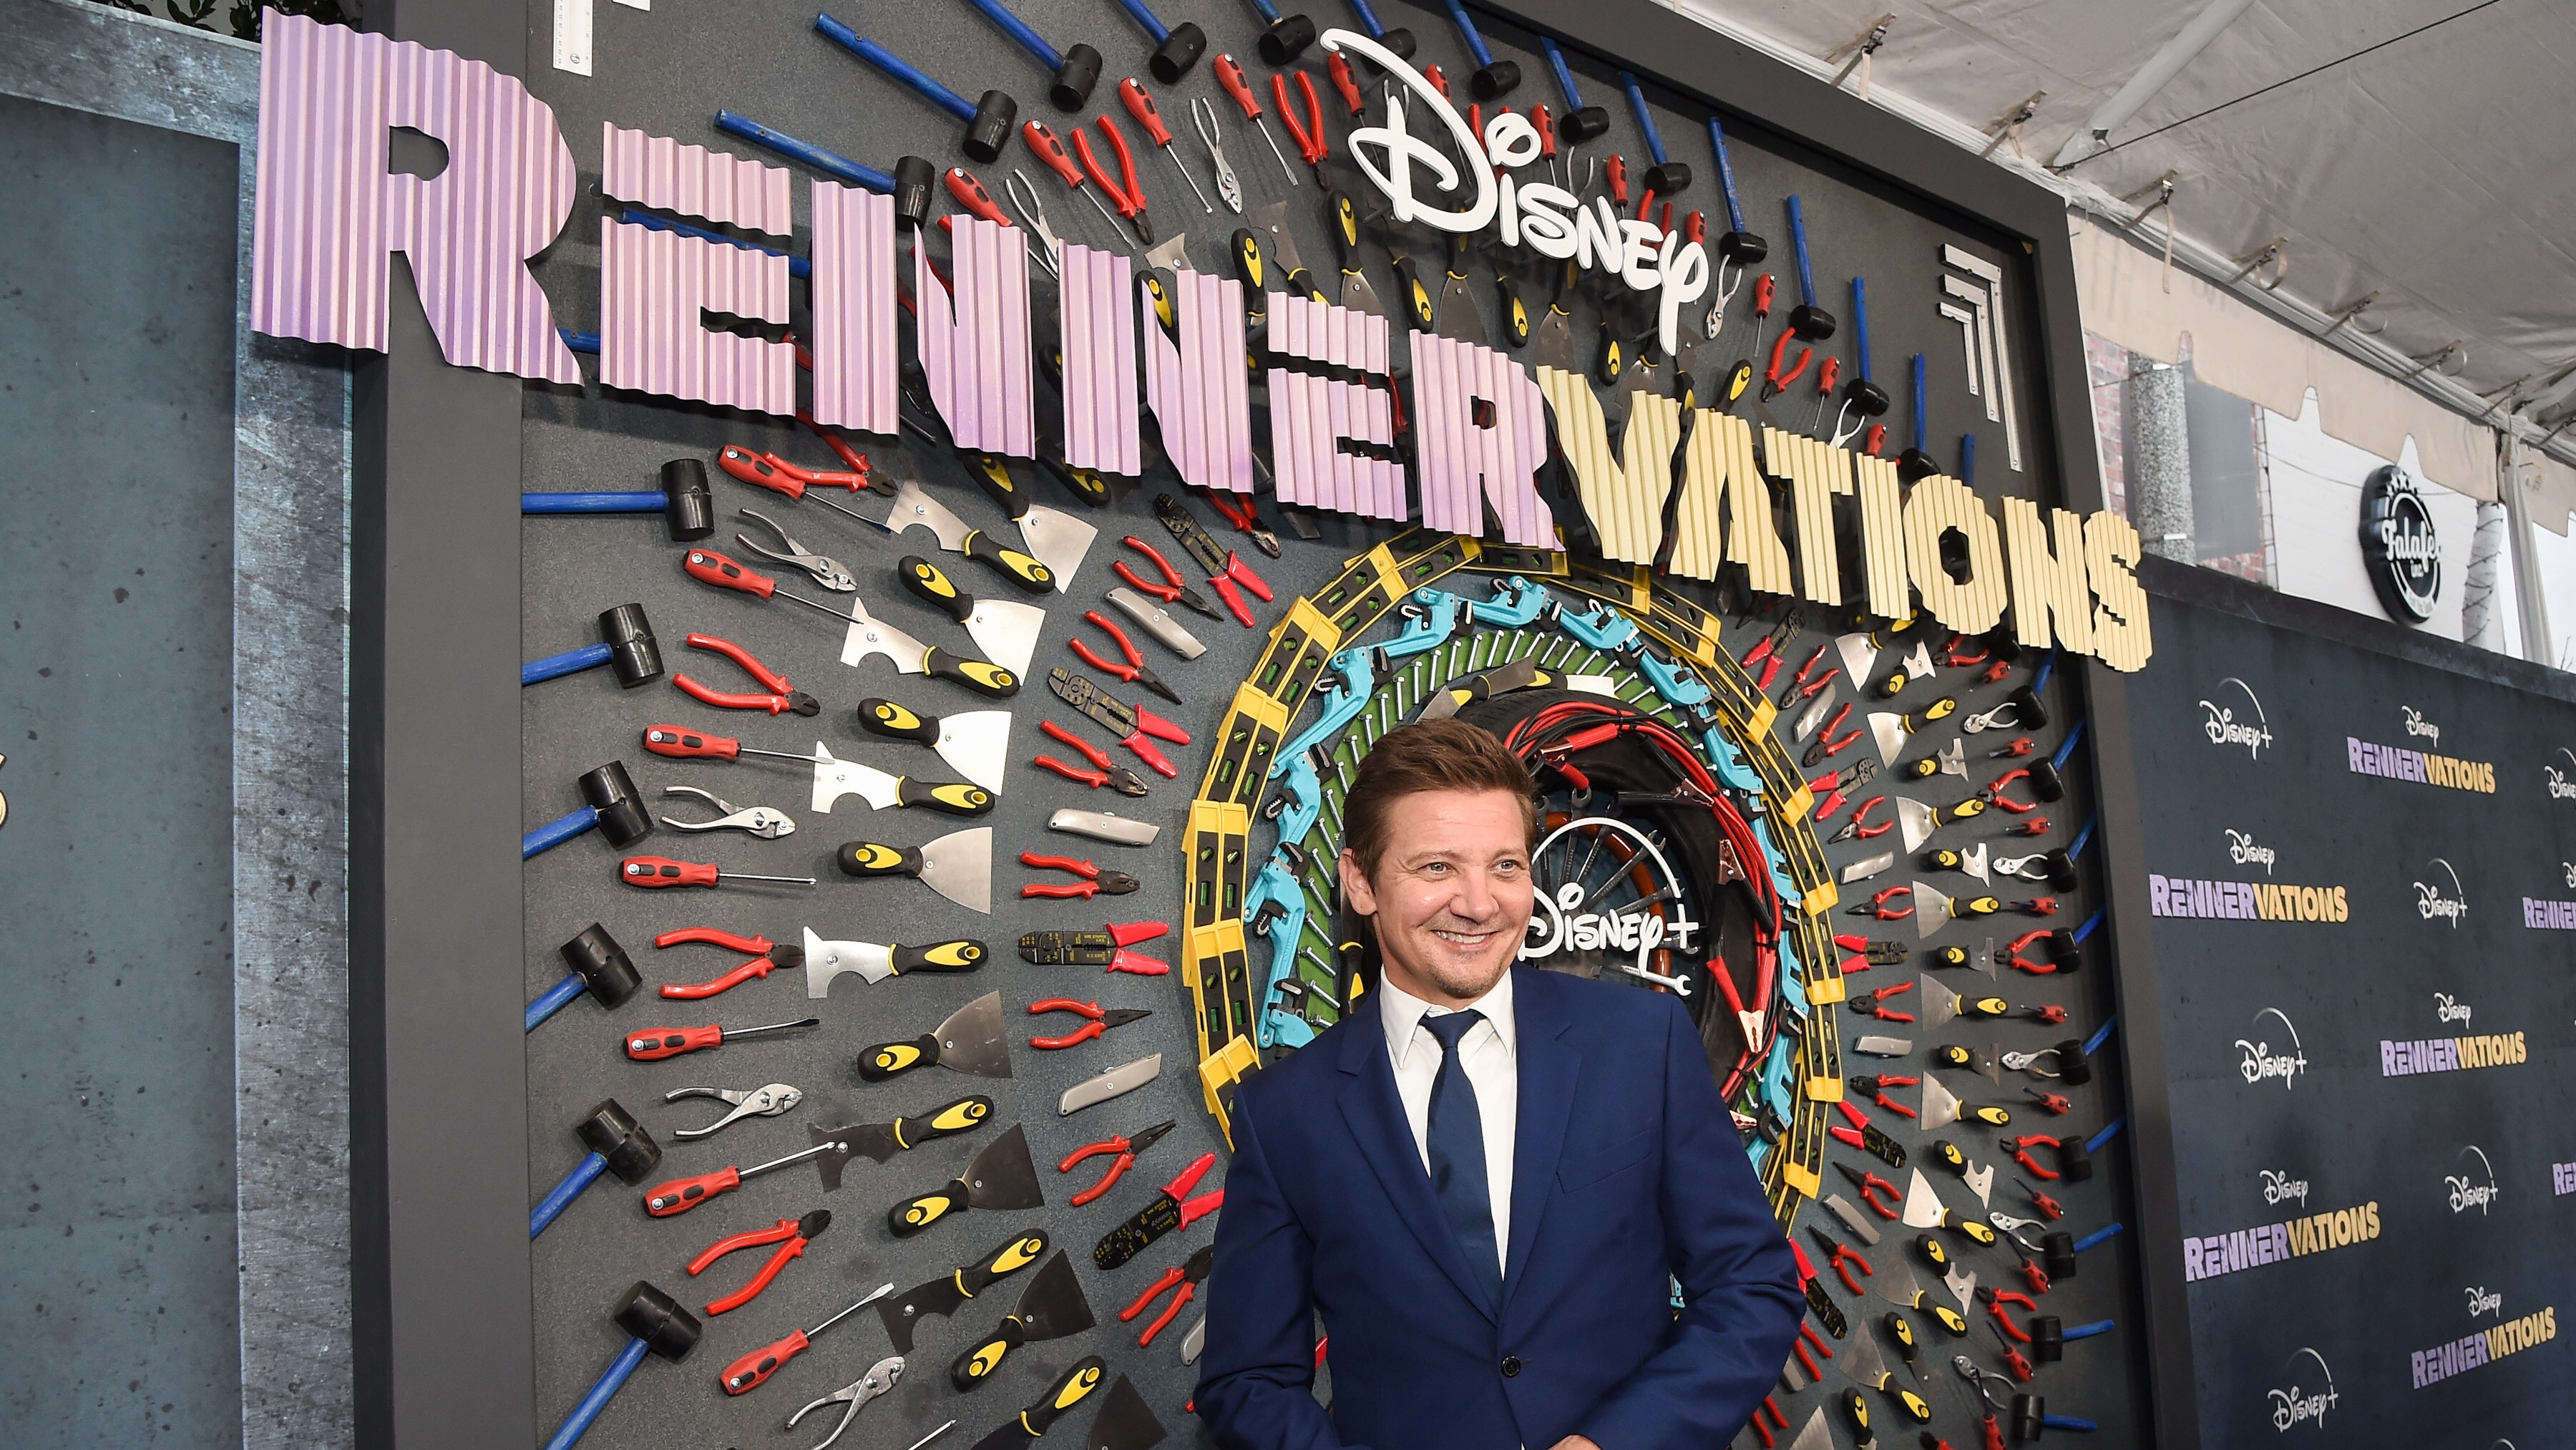 Jeremy Renner Walks The Red-Carpet At The World Premiere And FYC Screening Event For Disney+ Original Series “Rennervations”